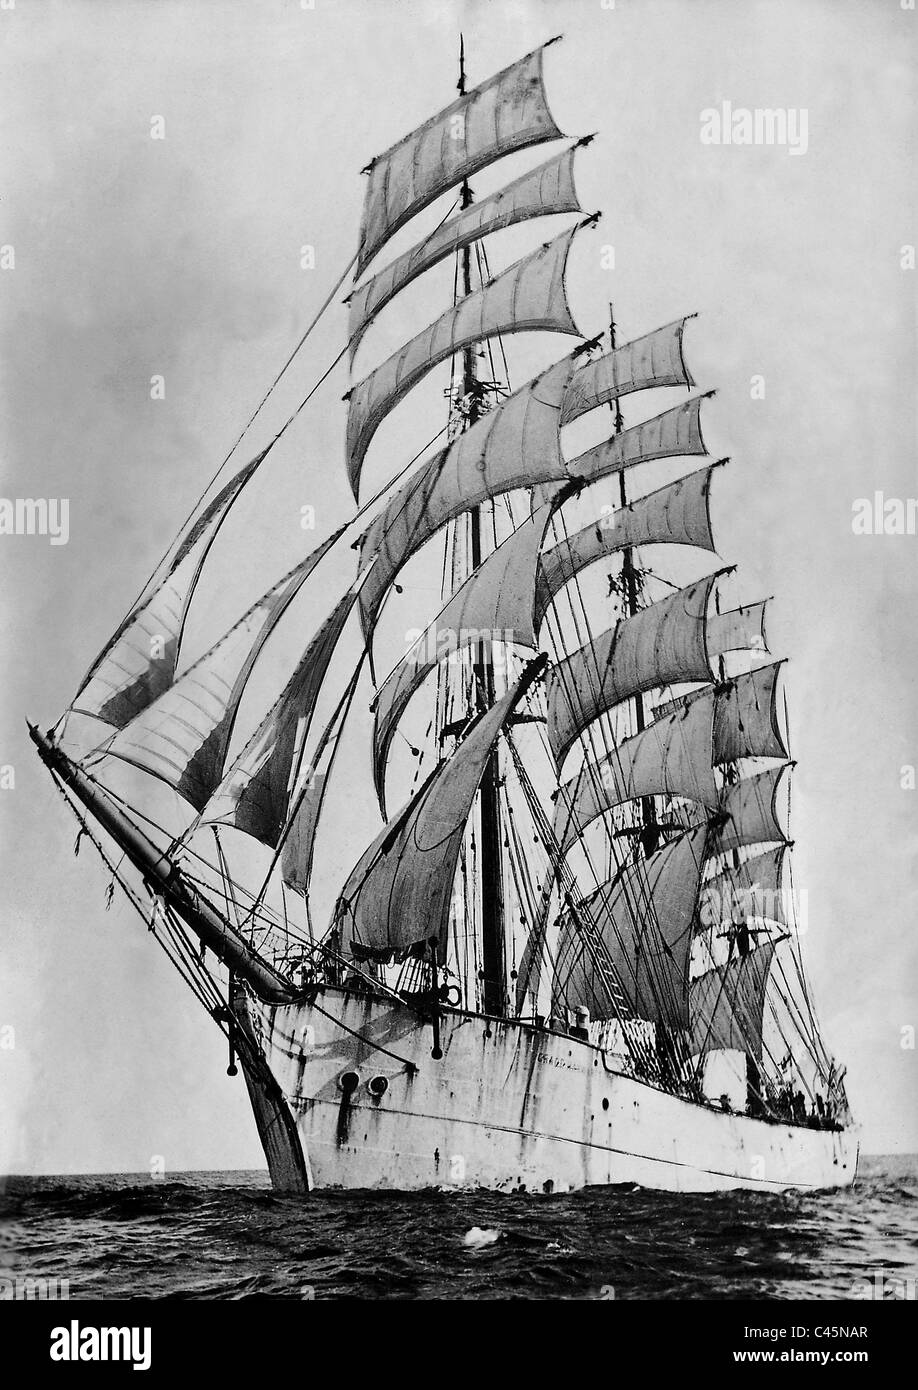 Full-rigged ship on the high seas Stock Photo